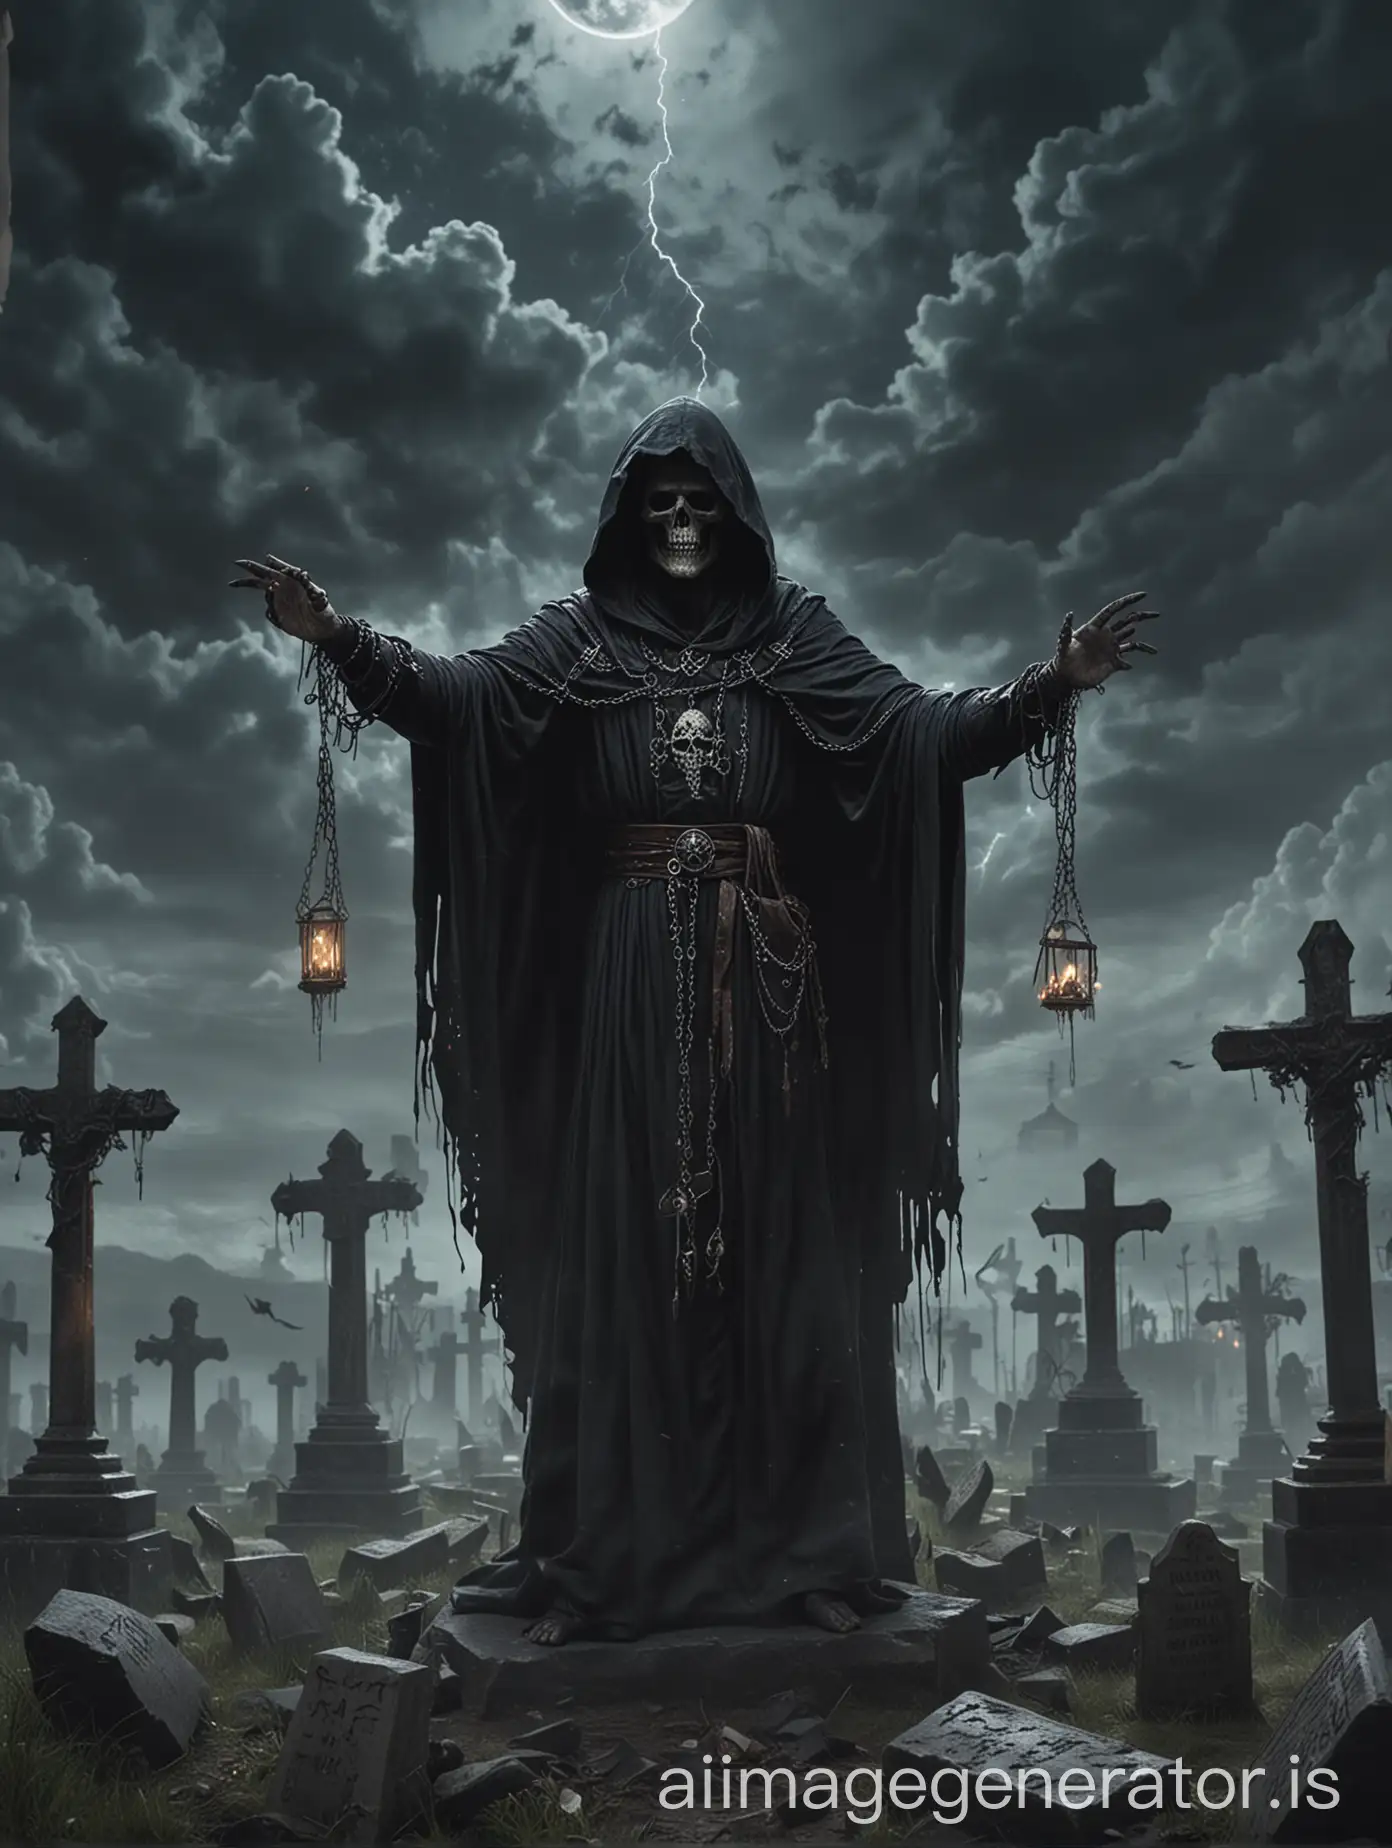 A necromancer with a dark hooded robe and chains of magic around their hands, raises their hands towards the night sky filled with dark clouds, with old graves and grave stones surrounding